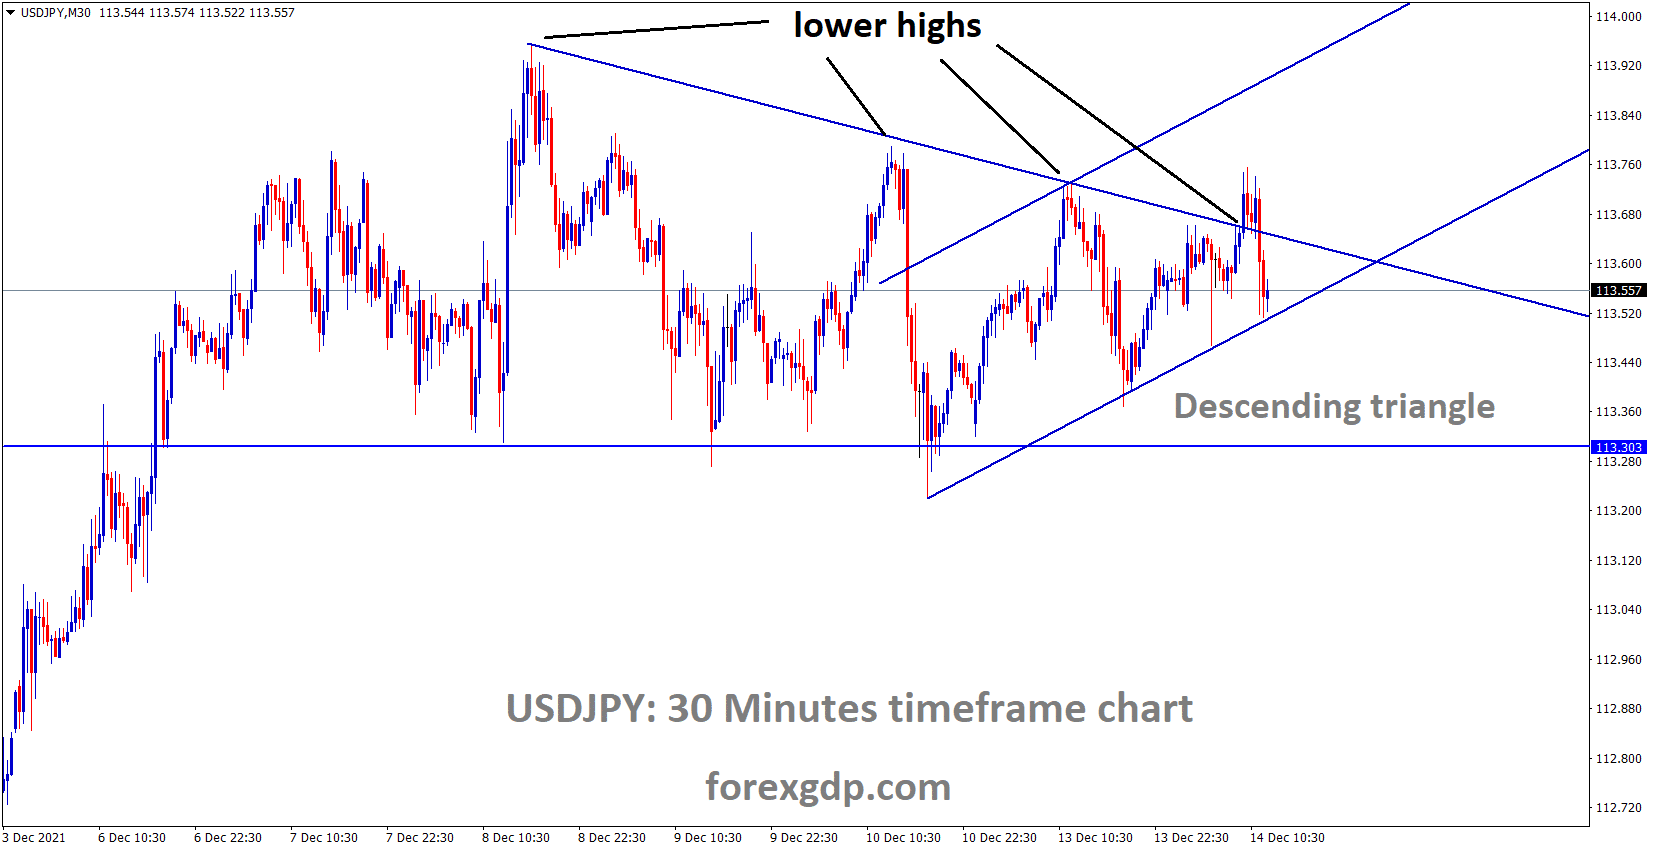 USDJPY is moving the major descending triangle pattern and market falling from the top of the triangle pattern